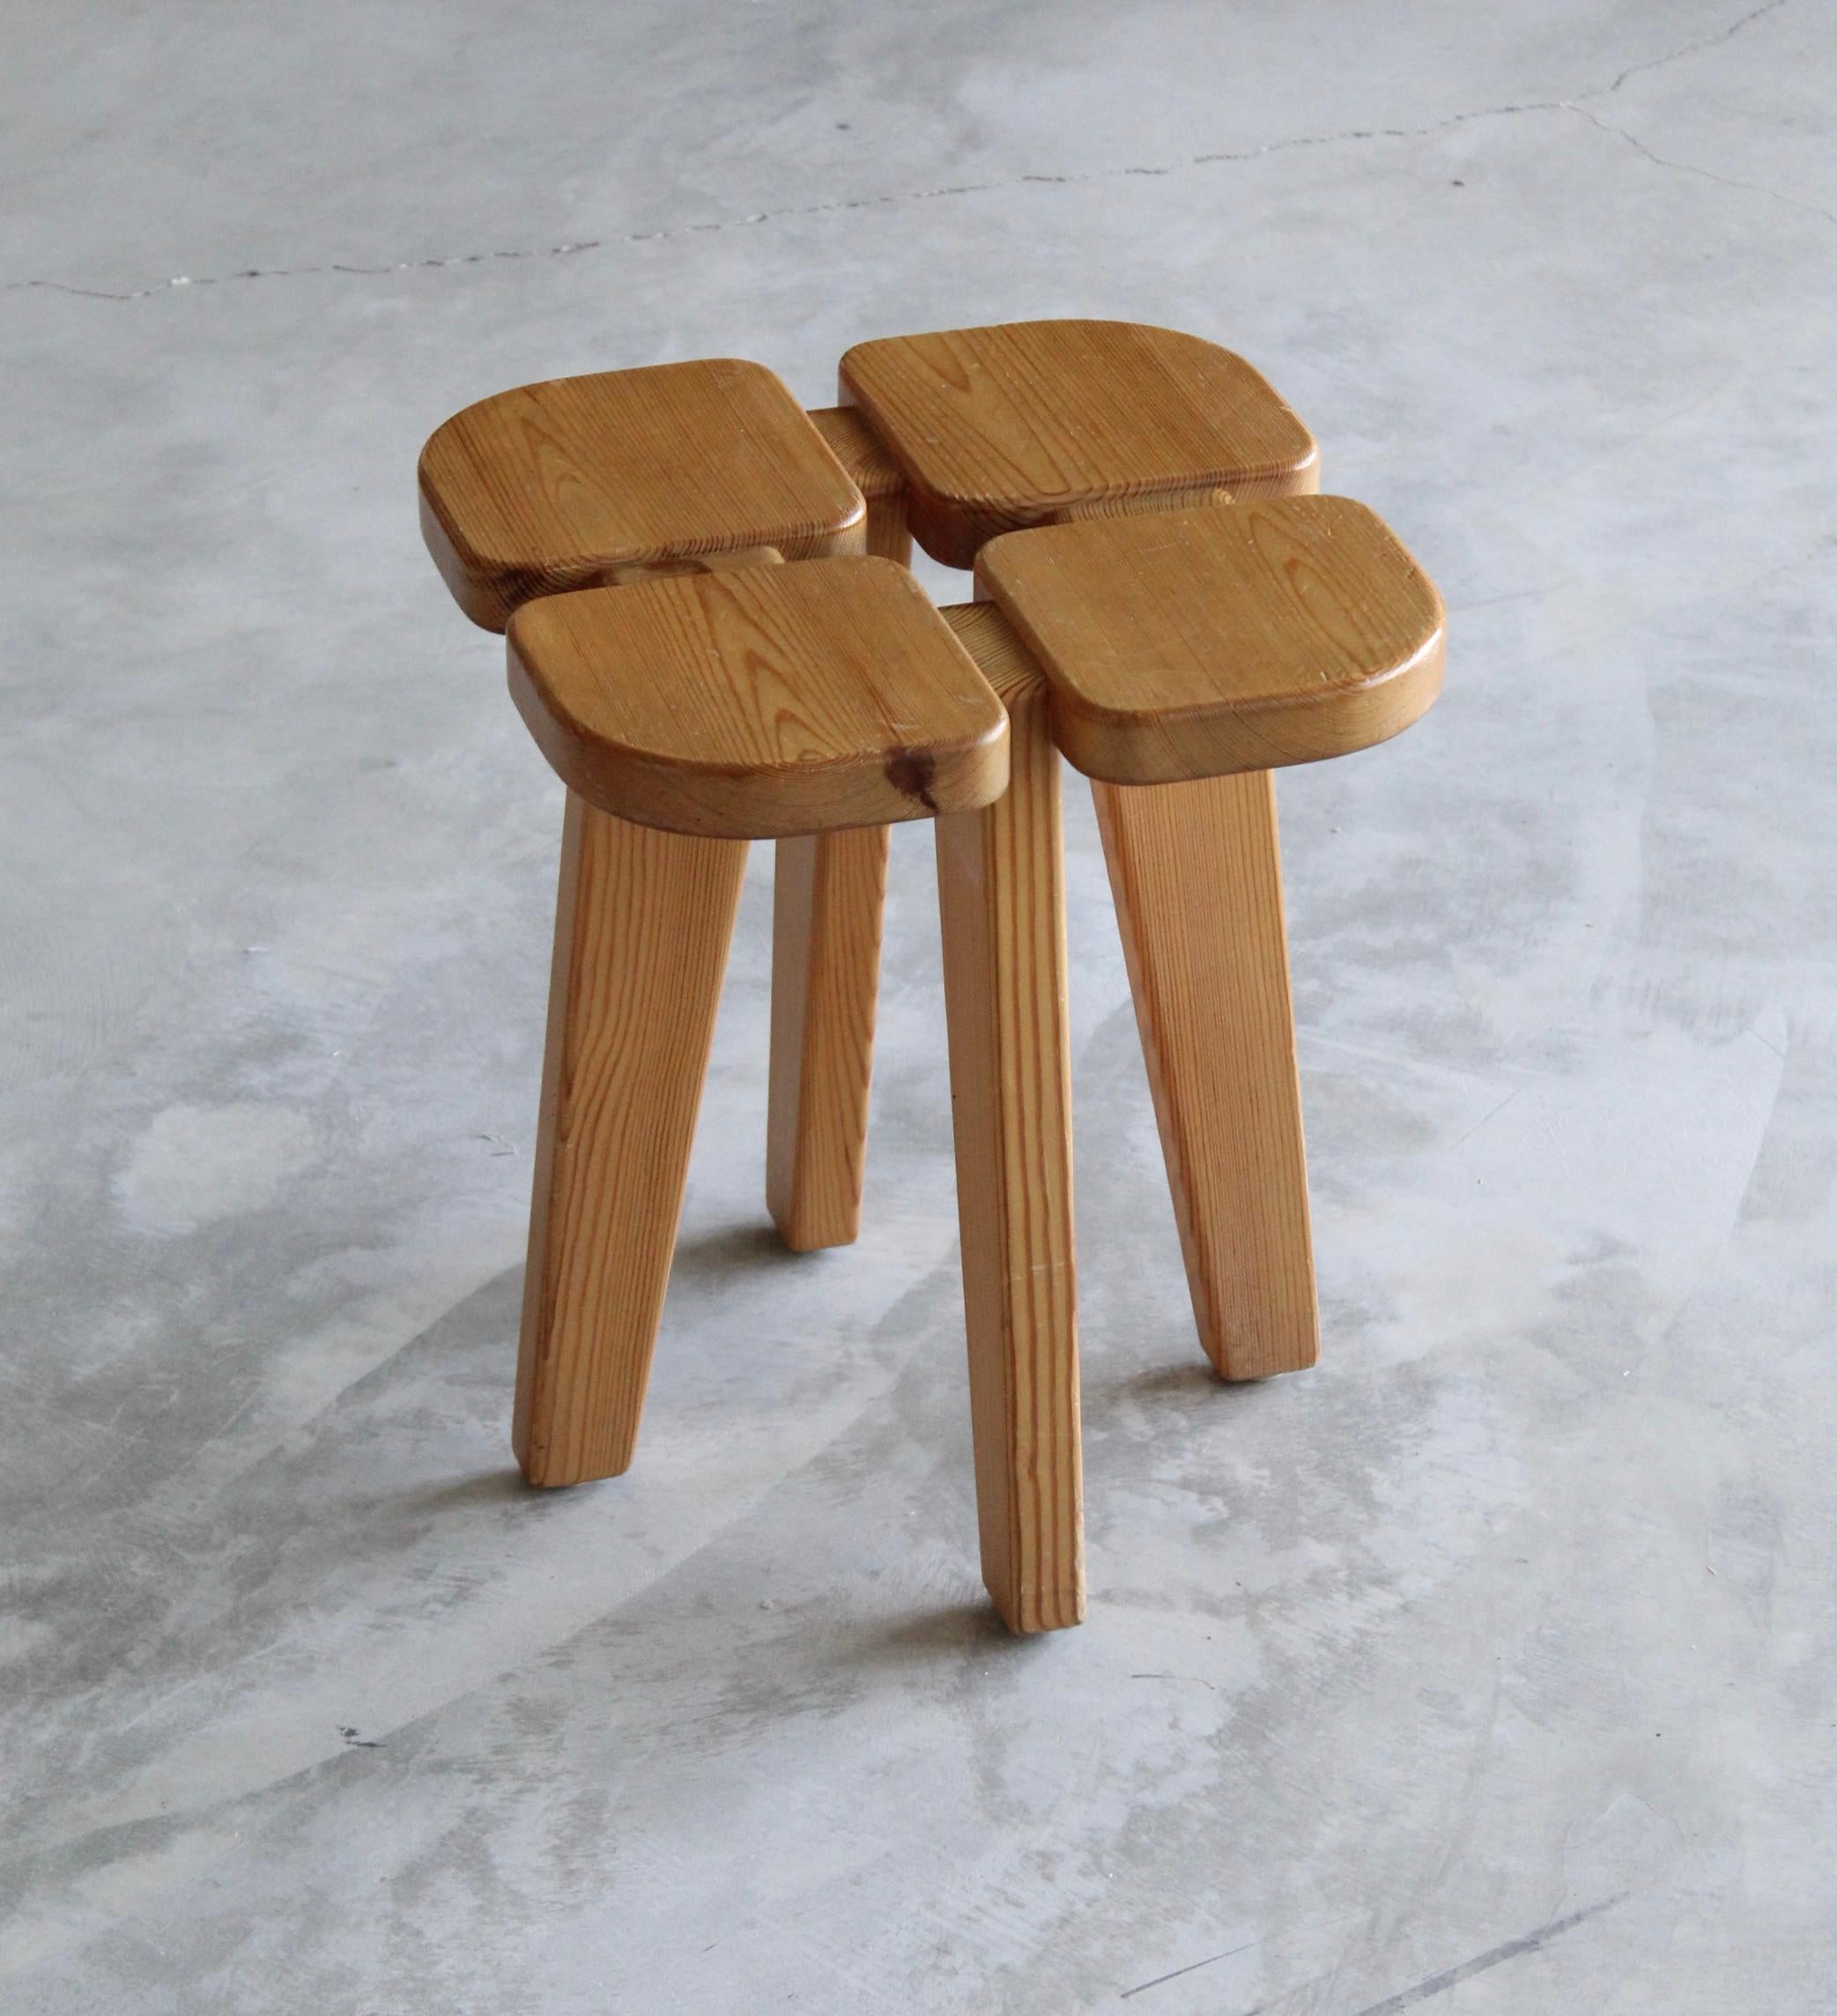 A stool, design attributed to Finnish Lisa Johansson-Pape, produced by Kervo Snickerifabrik for Oy Stockmann Ab, 1970s. In stained pine.

Other designers working in similar functionalist ethos include Pierre Jeanneret, Pierre Chapo, Axel Einar